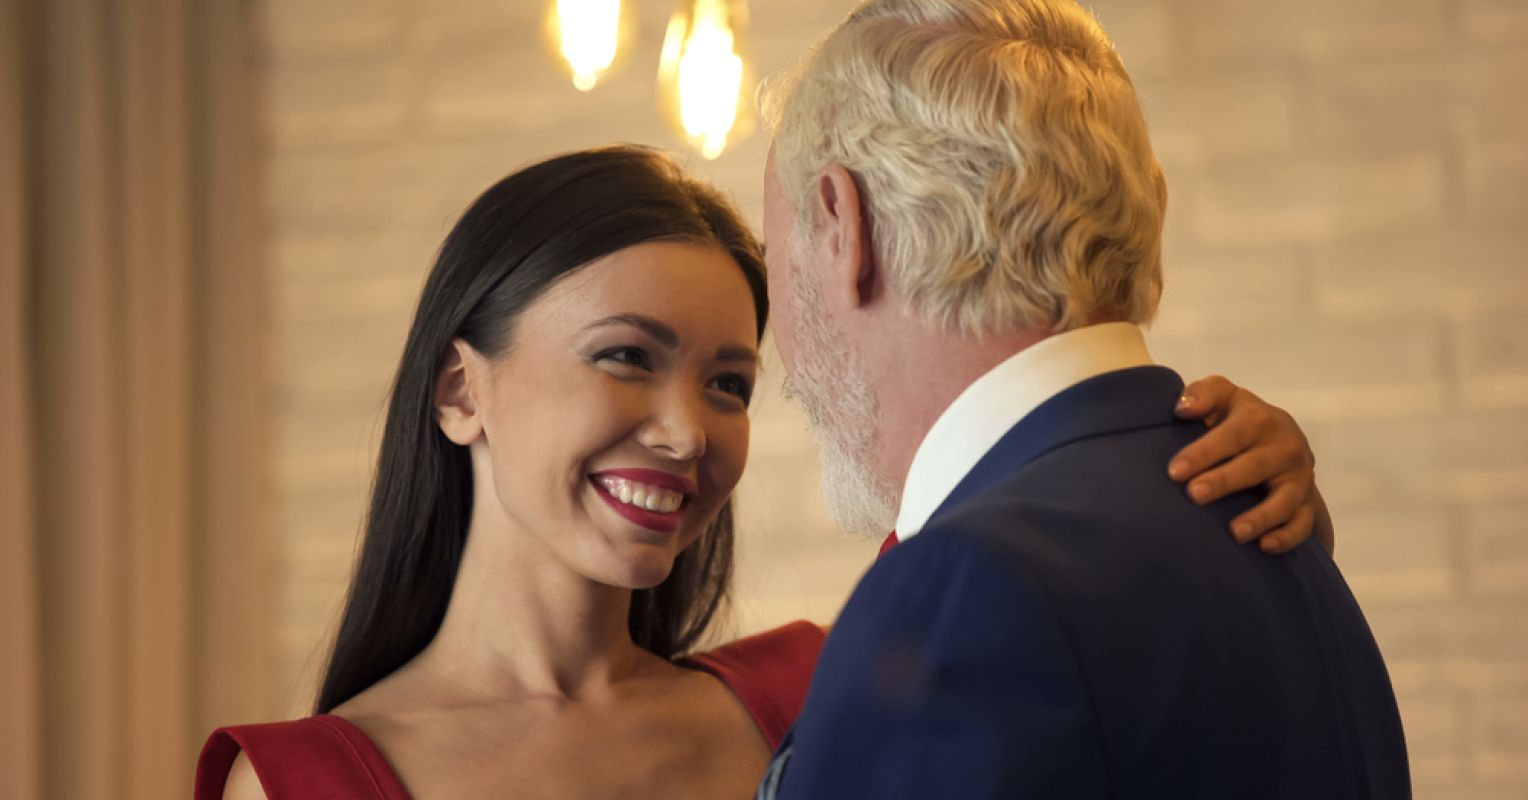 Why Many Young Women Prefer to Date Older Men | Psychology Today